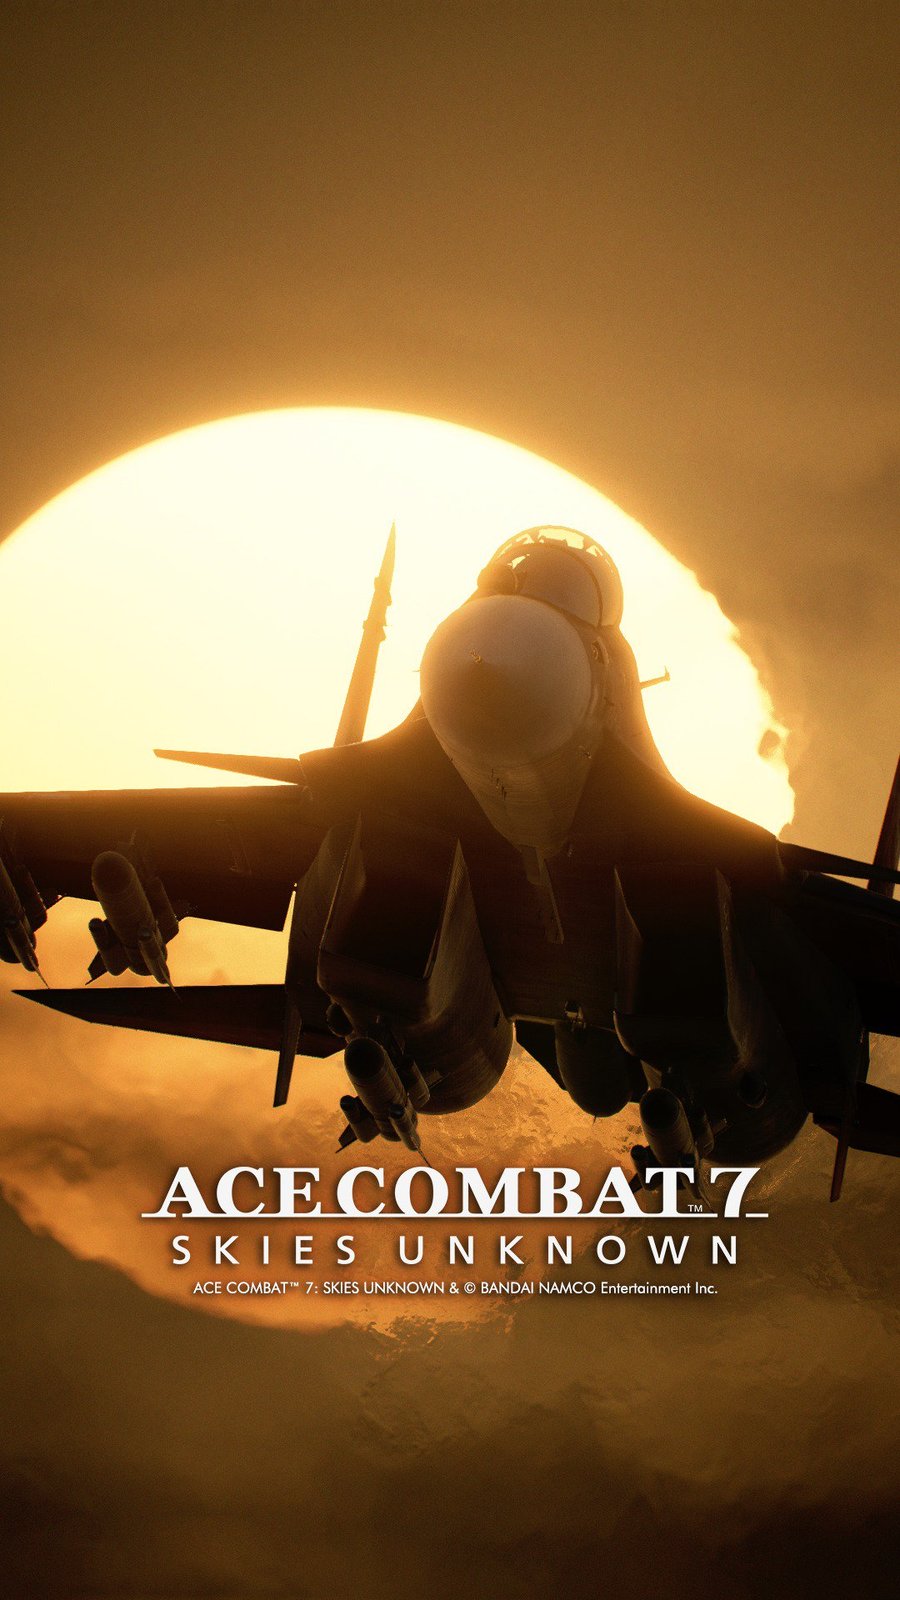 Ace-combat-7-skies-unknown-1515248575910500